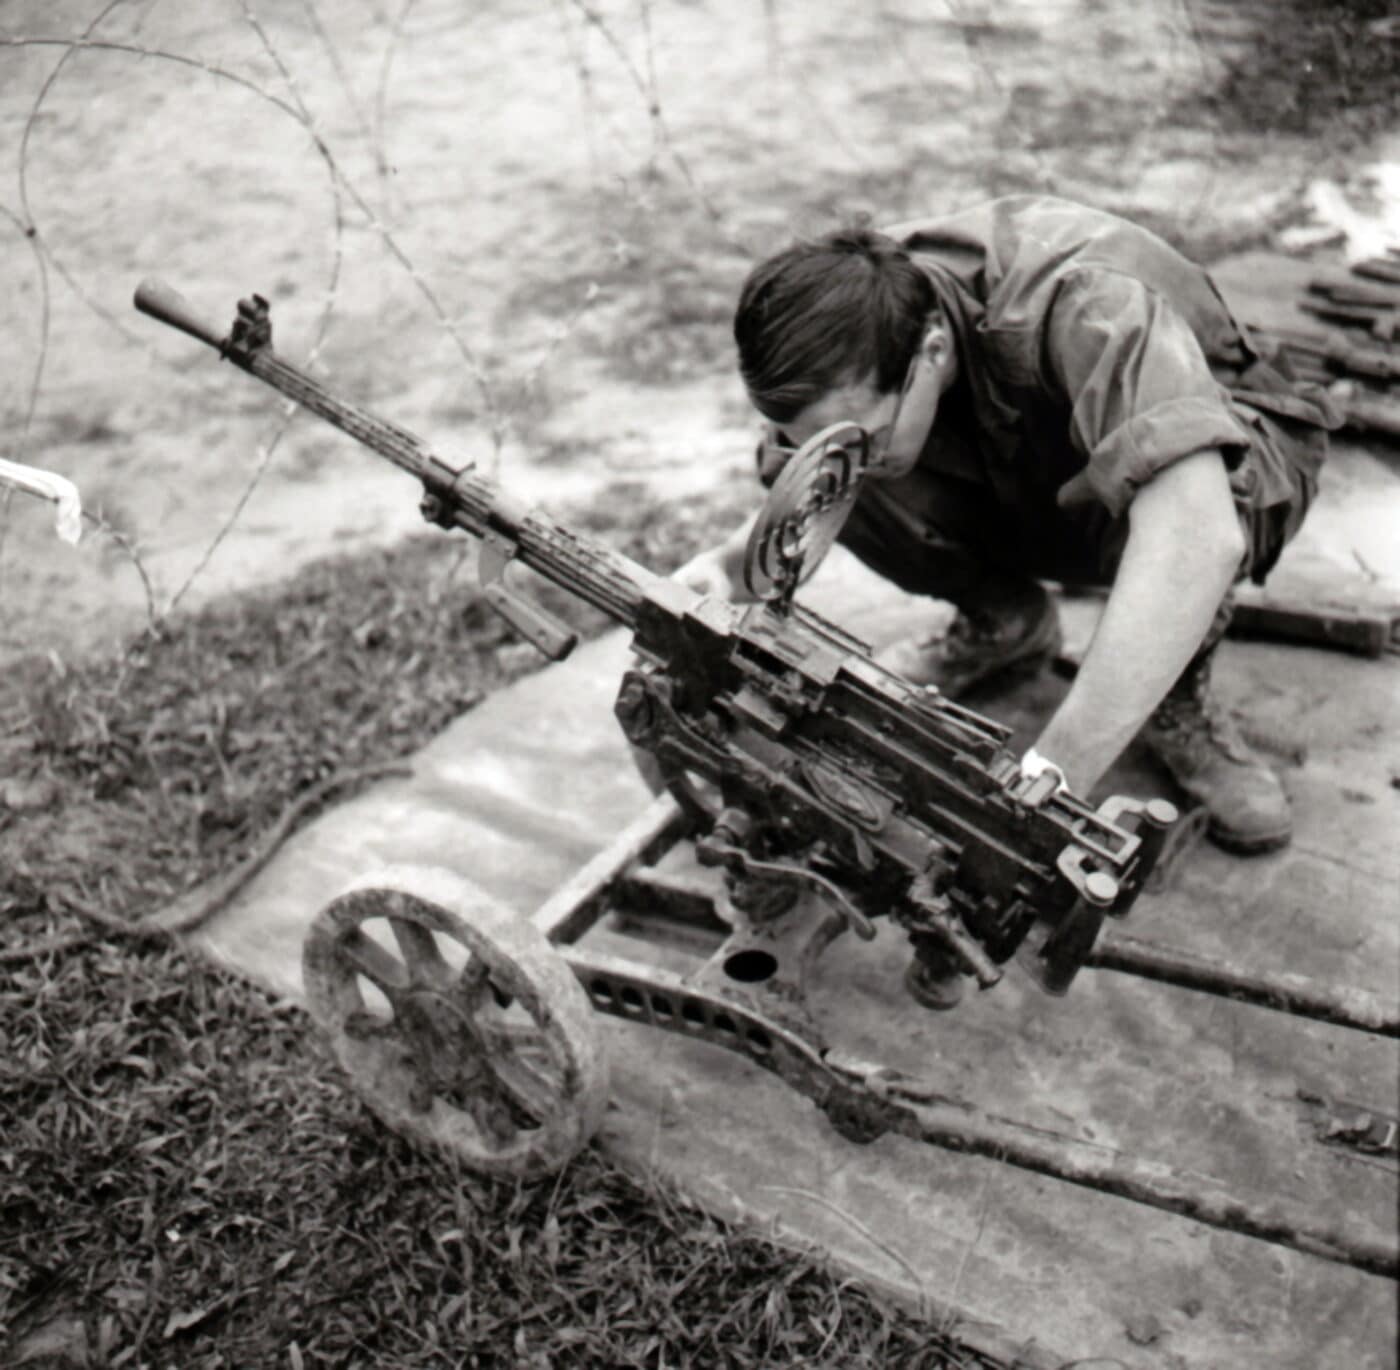 Solider crouching next to a Type 53 MG with AA sight